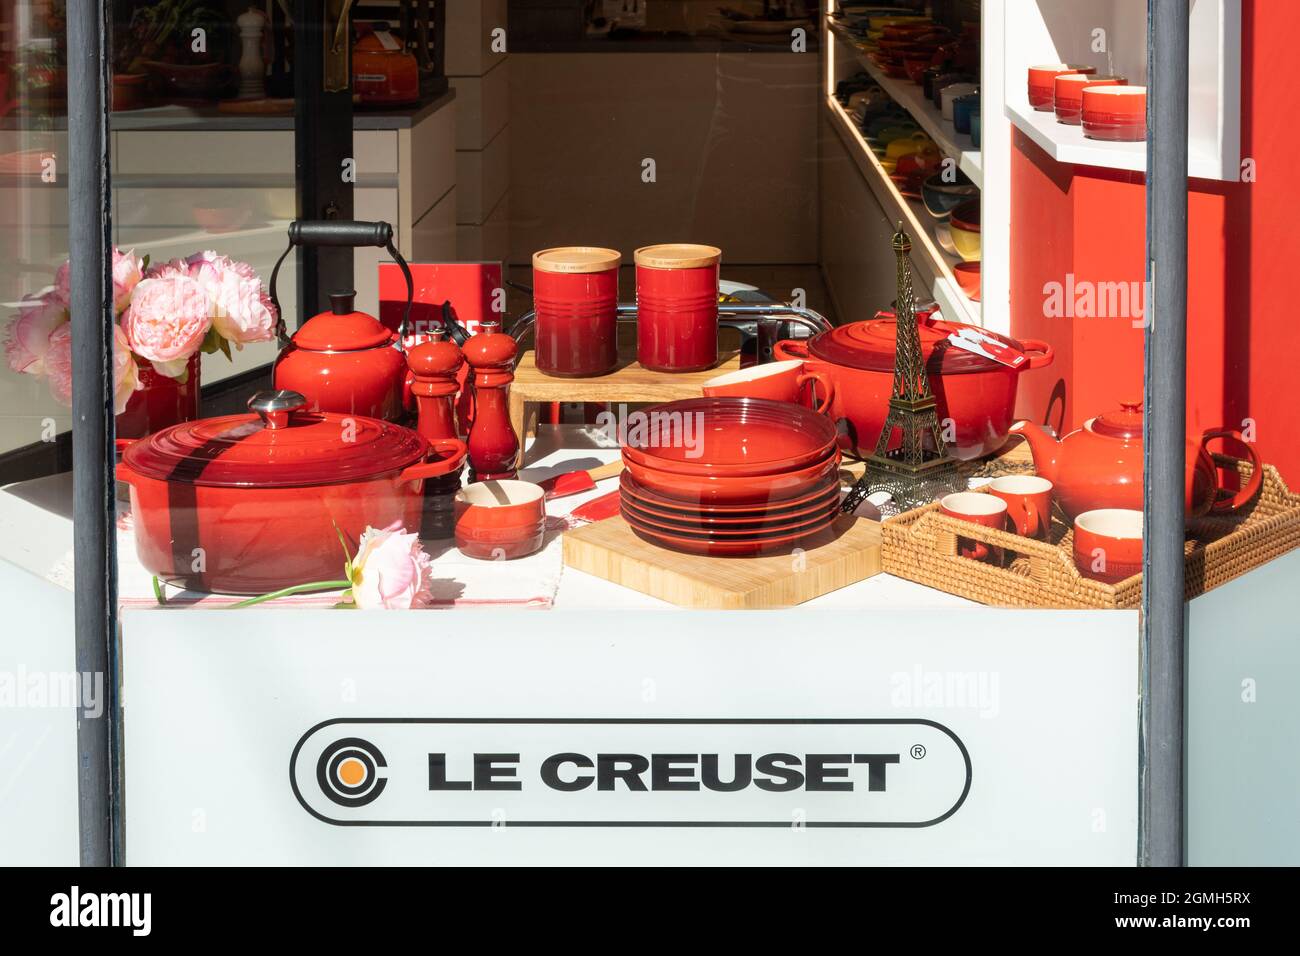 https://c8.alamy.com/comp/2GMH5RX/le-creuset-window-display-in-shop-or-store-front-french-retailer-of-cookware-best-known-for-colourful-enameled-cast-iron-cookware-uk-2GMH5RX.jpg